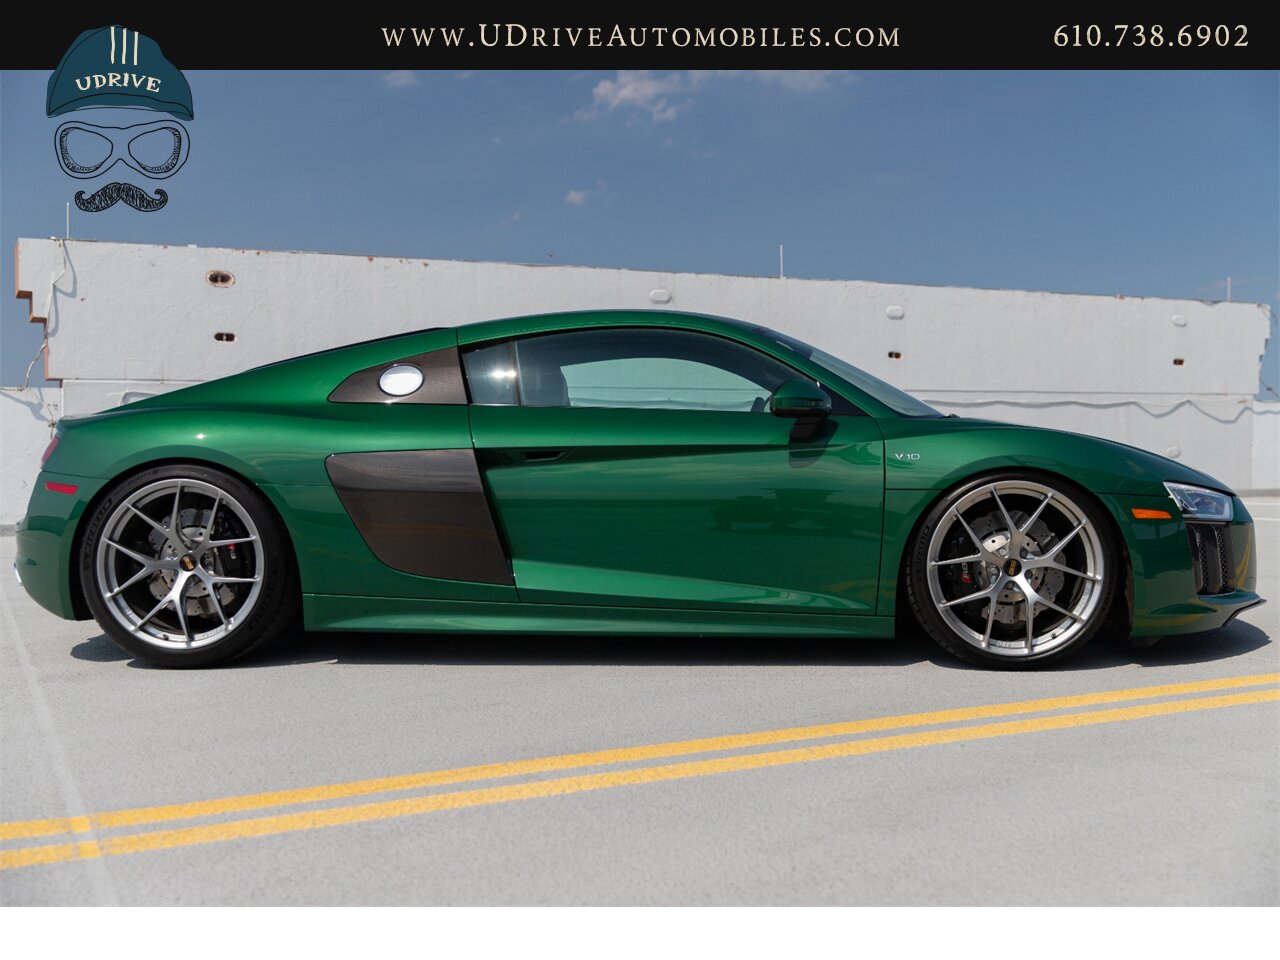 2017 Audi R8 Audi Exclusive Avocado Green Vermont Brown Leather  Diamond Stitching V10 Carbon Fiber - Photo 19 - West Chester, PA 19382